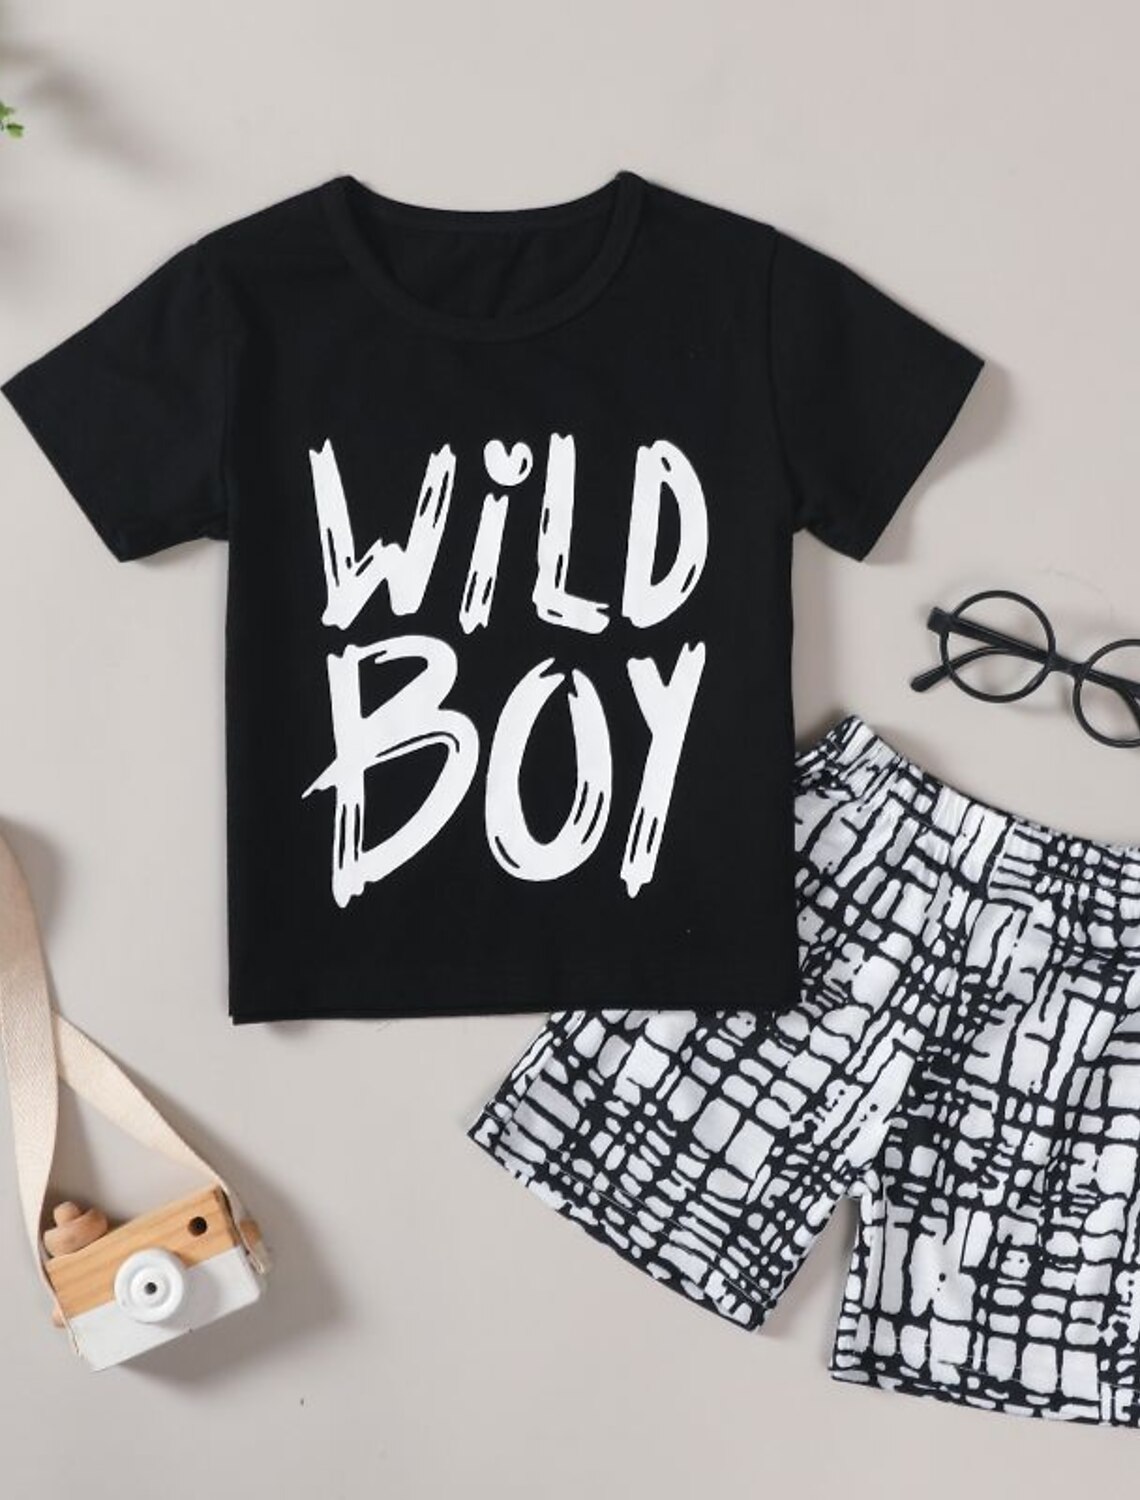 Toddler Boy Summer Clothes Outfits Little Kids Short Sleeve Funny Letter Print T-Shirt Camo Shorts Clothing Set 